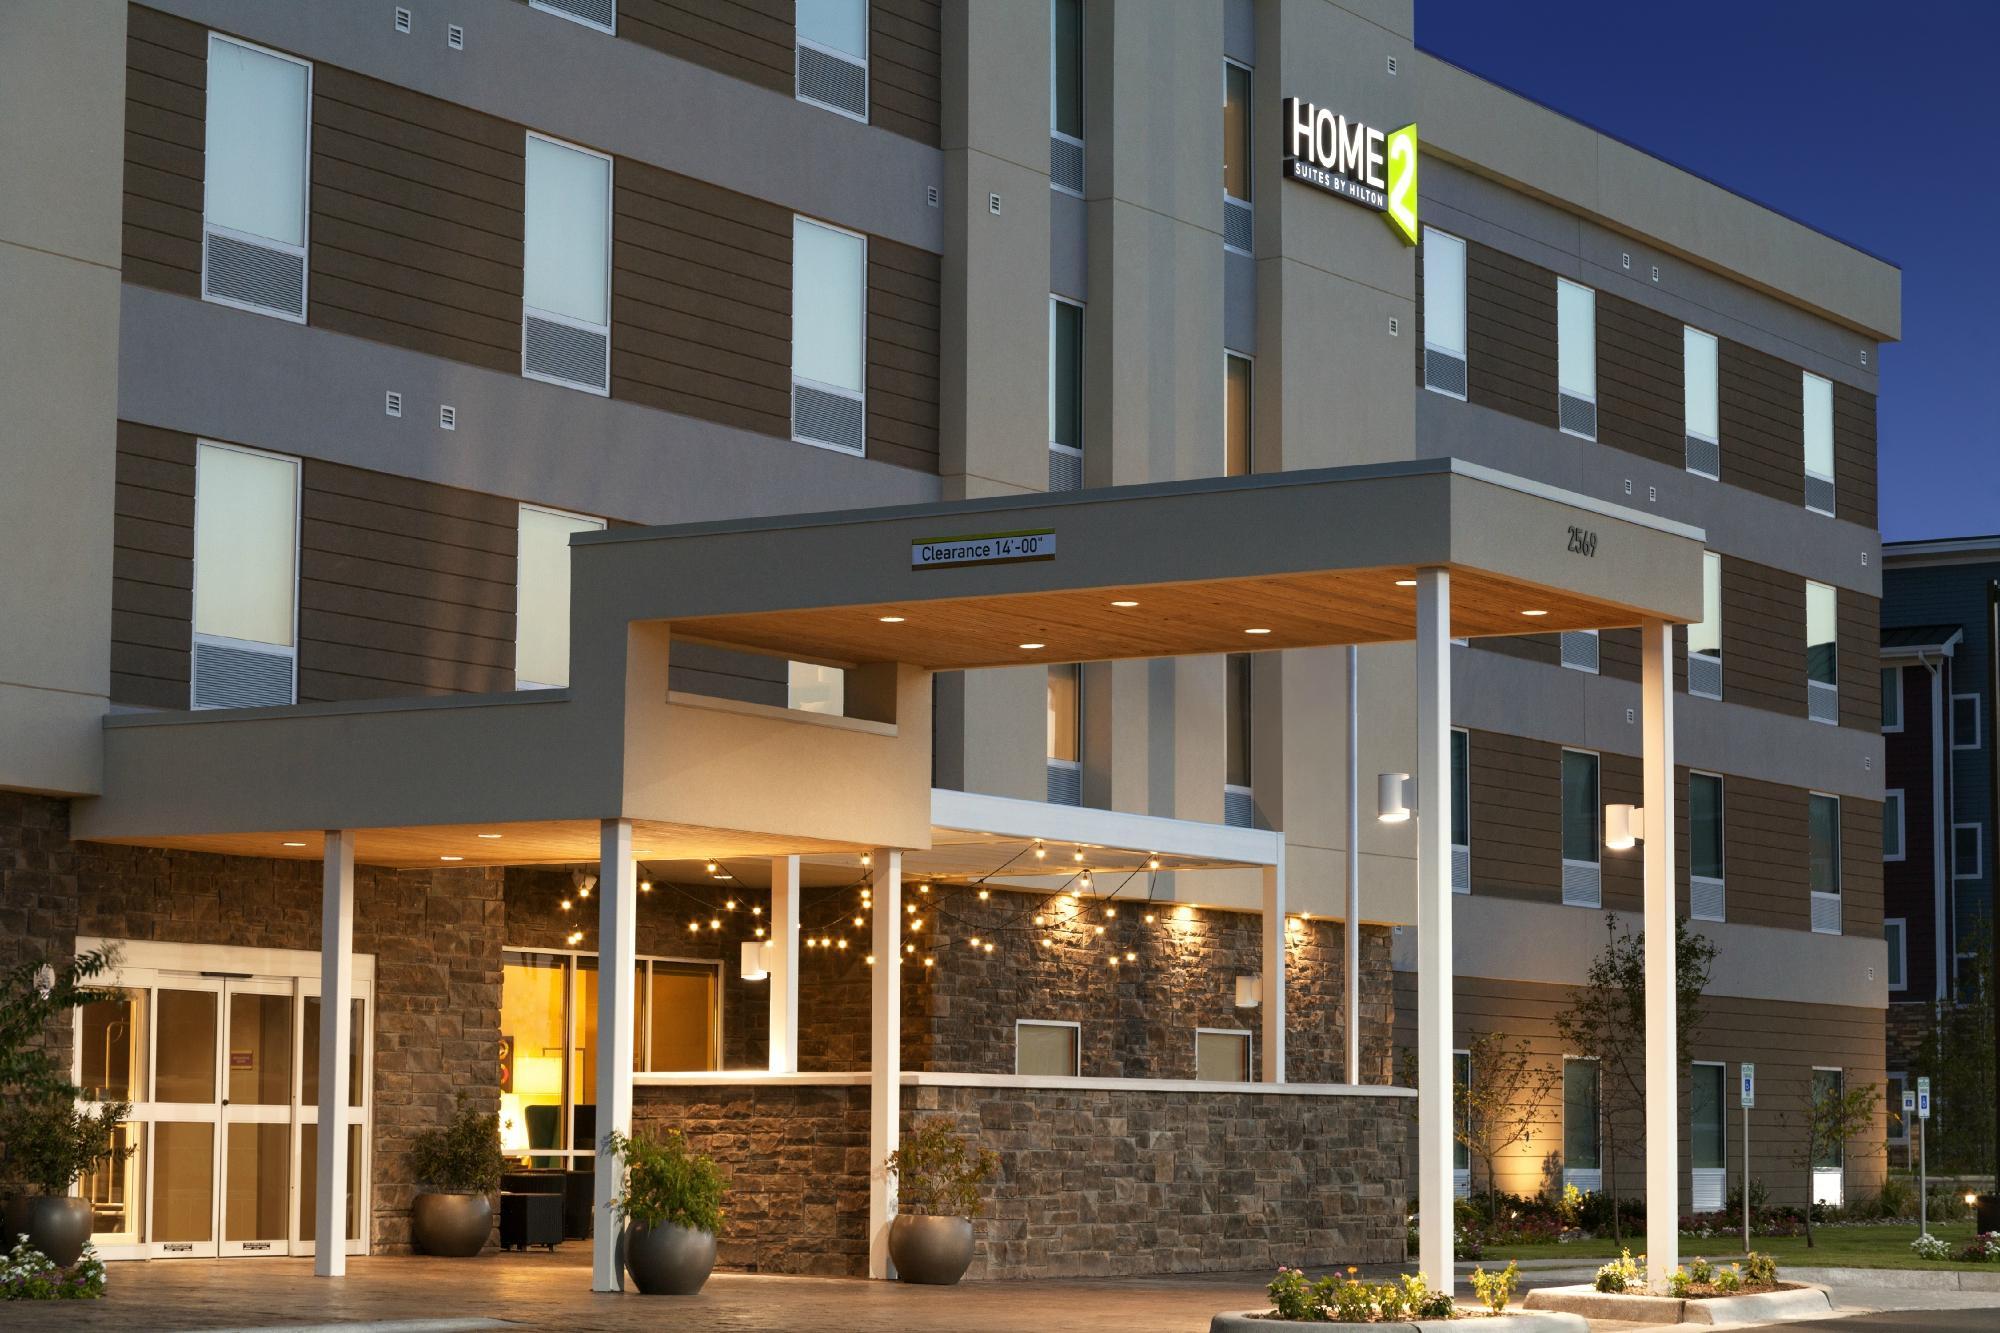 Photo of Home2 Suites by Hilton San Angelo, San Angelo, TX